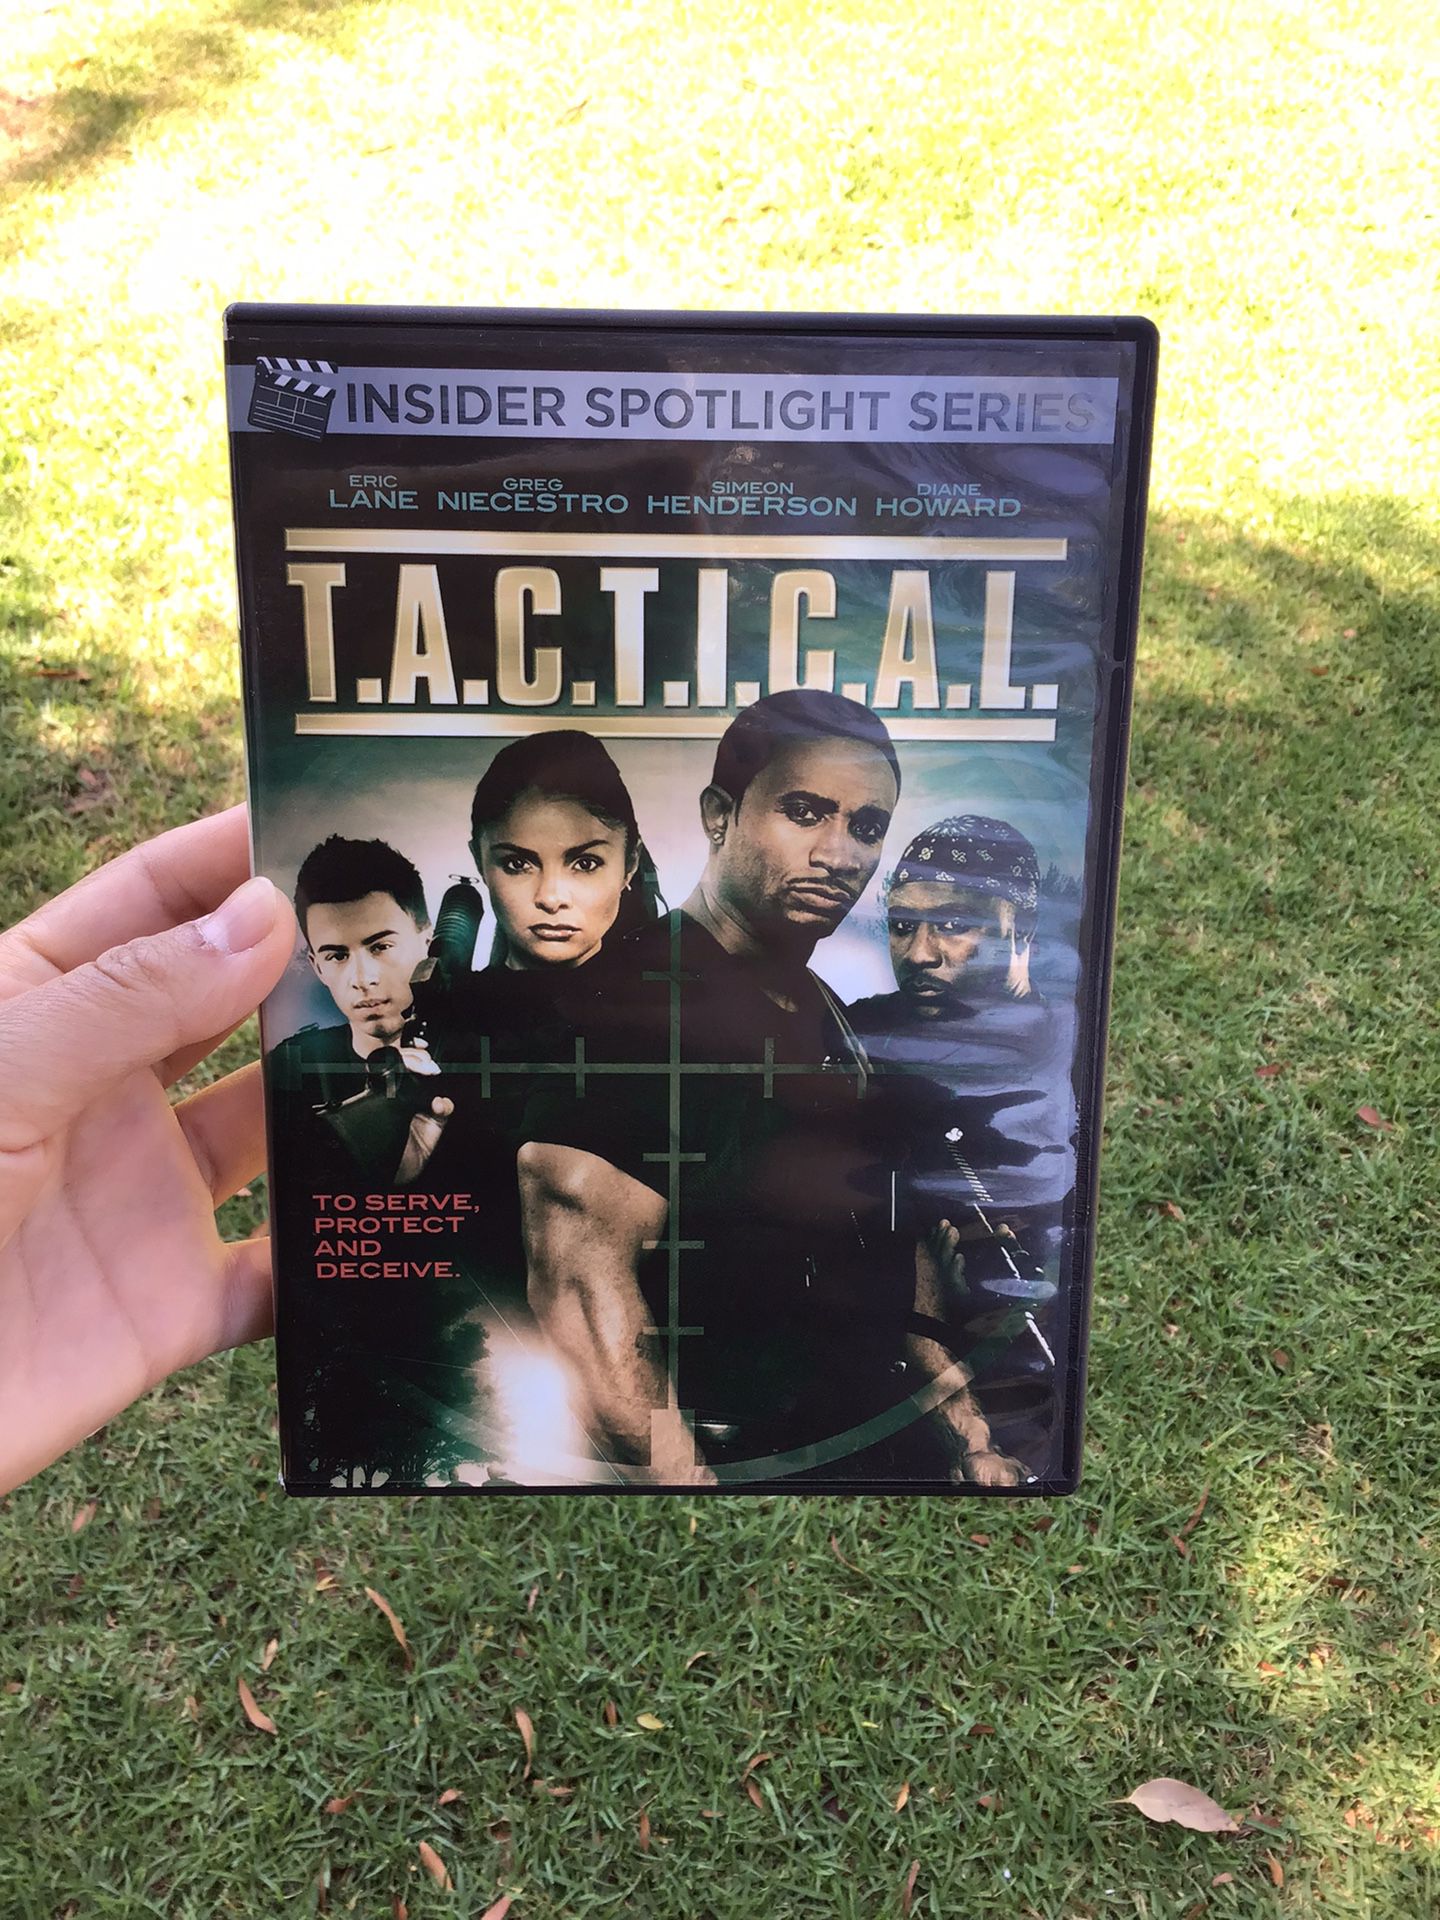 T.A.C.T.I.C.A.L. Movie DVD Player 2009 Movies Tactical Police Officers